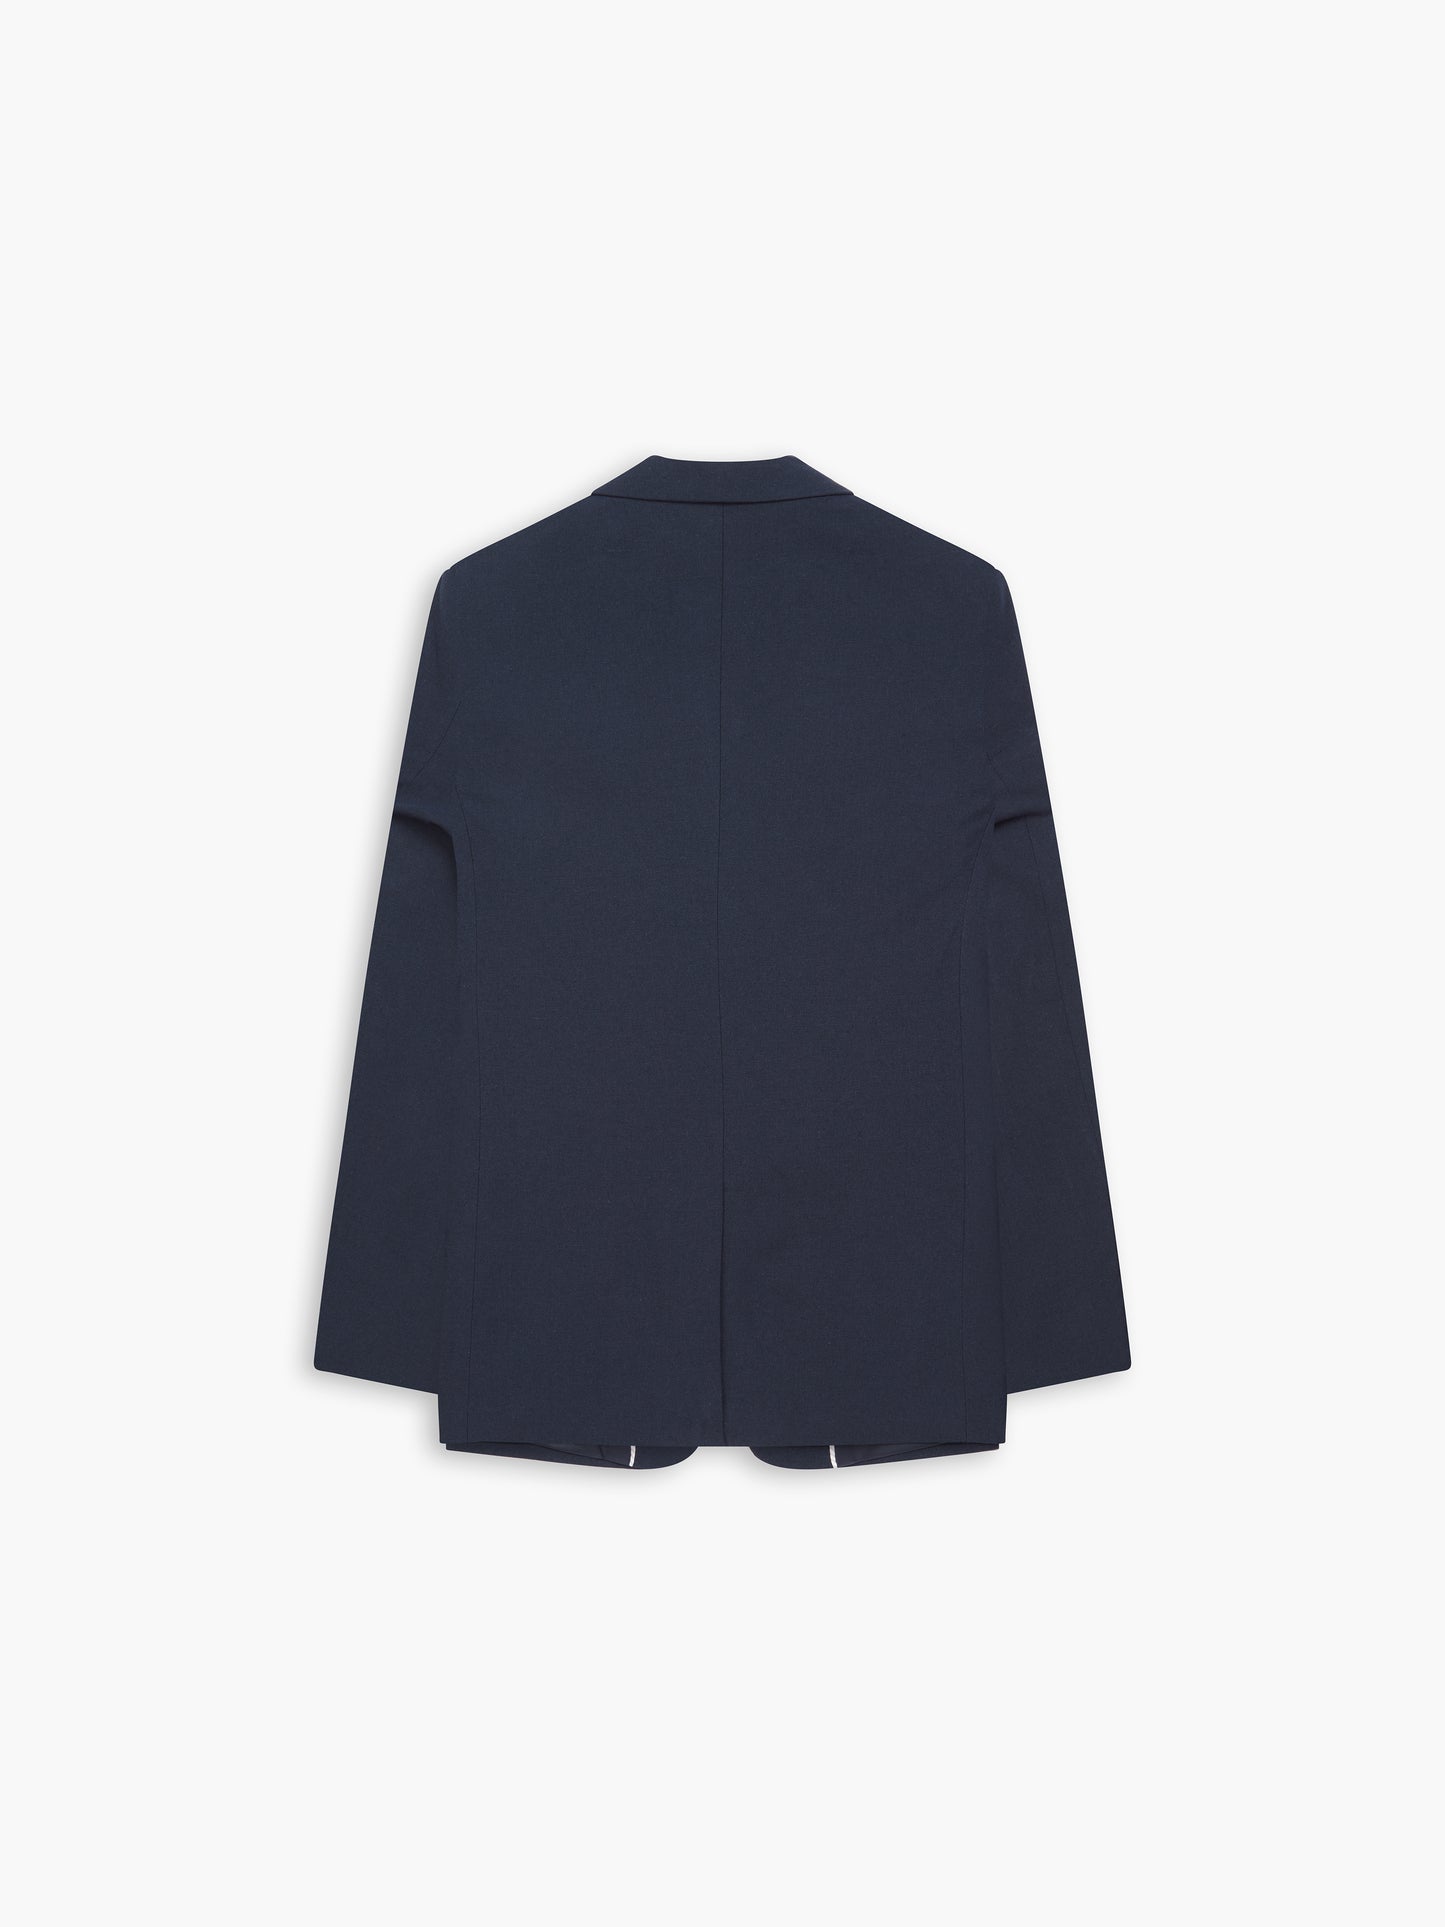 Piccadilly Linen Slim Navy Suit Jacket